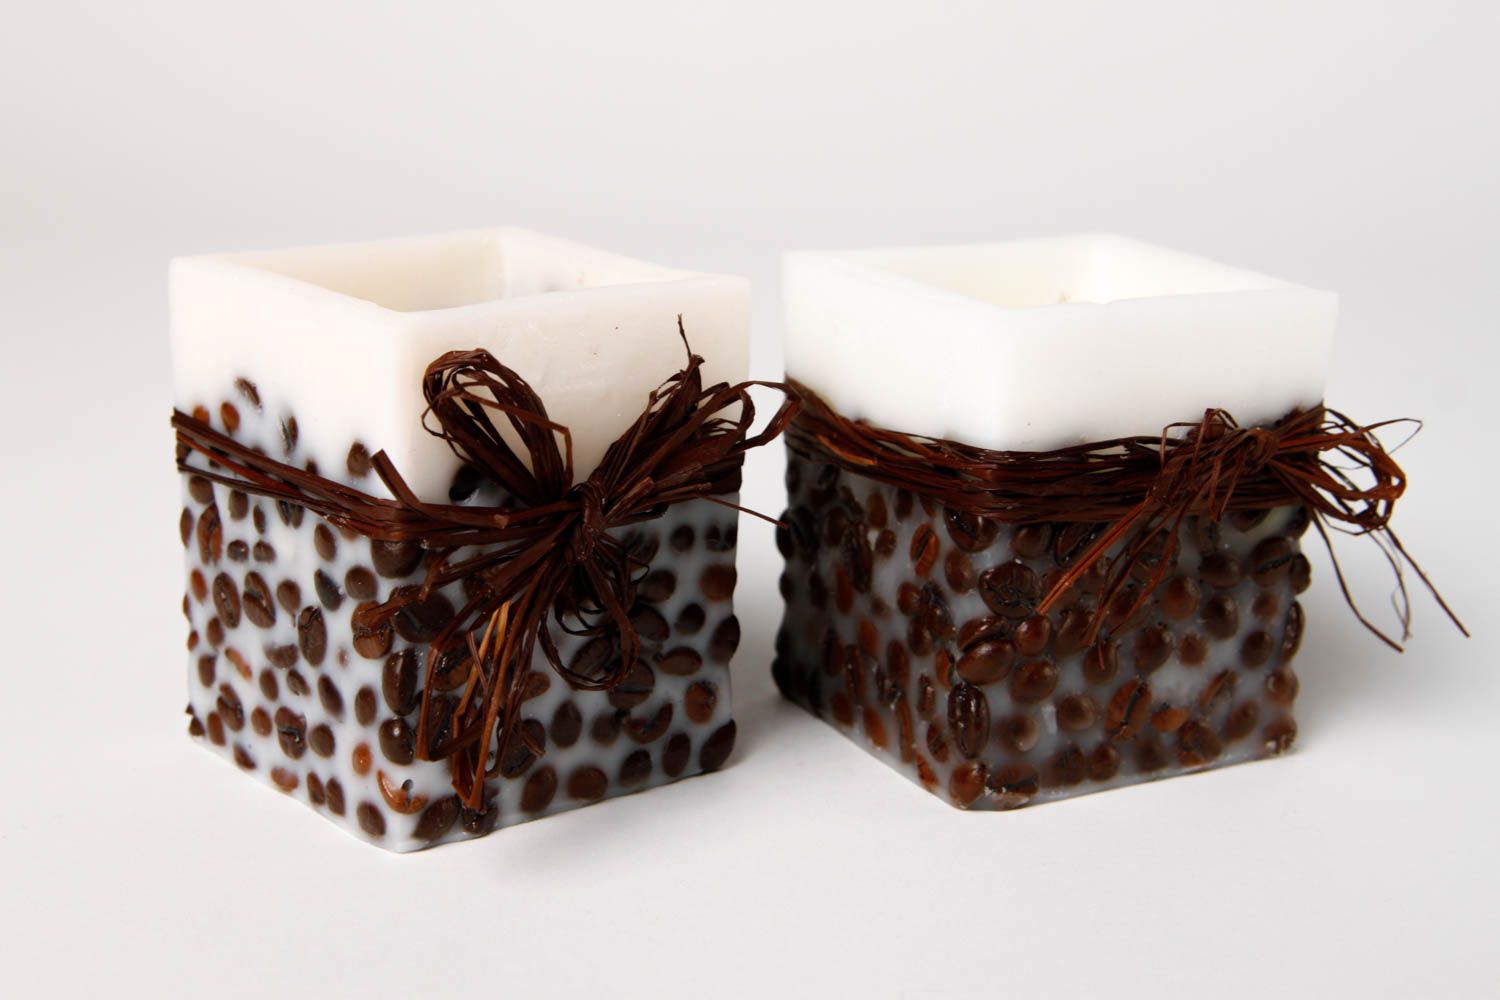 Beautiful handmade paraffin candles 2 pieces candle art ideas cool bedrooms photo 3